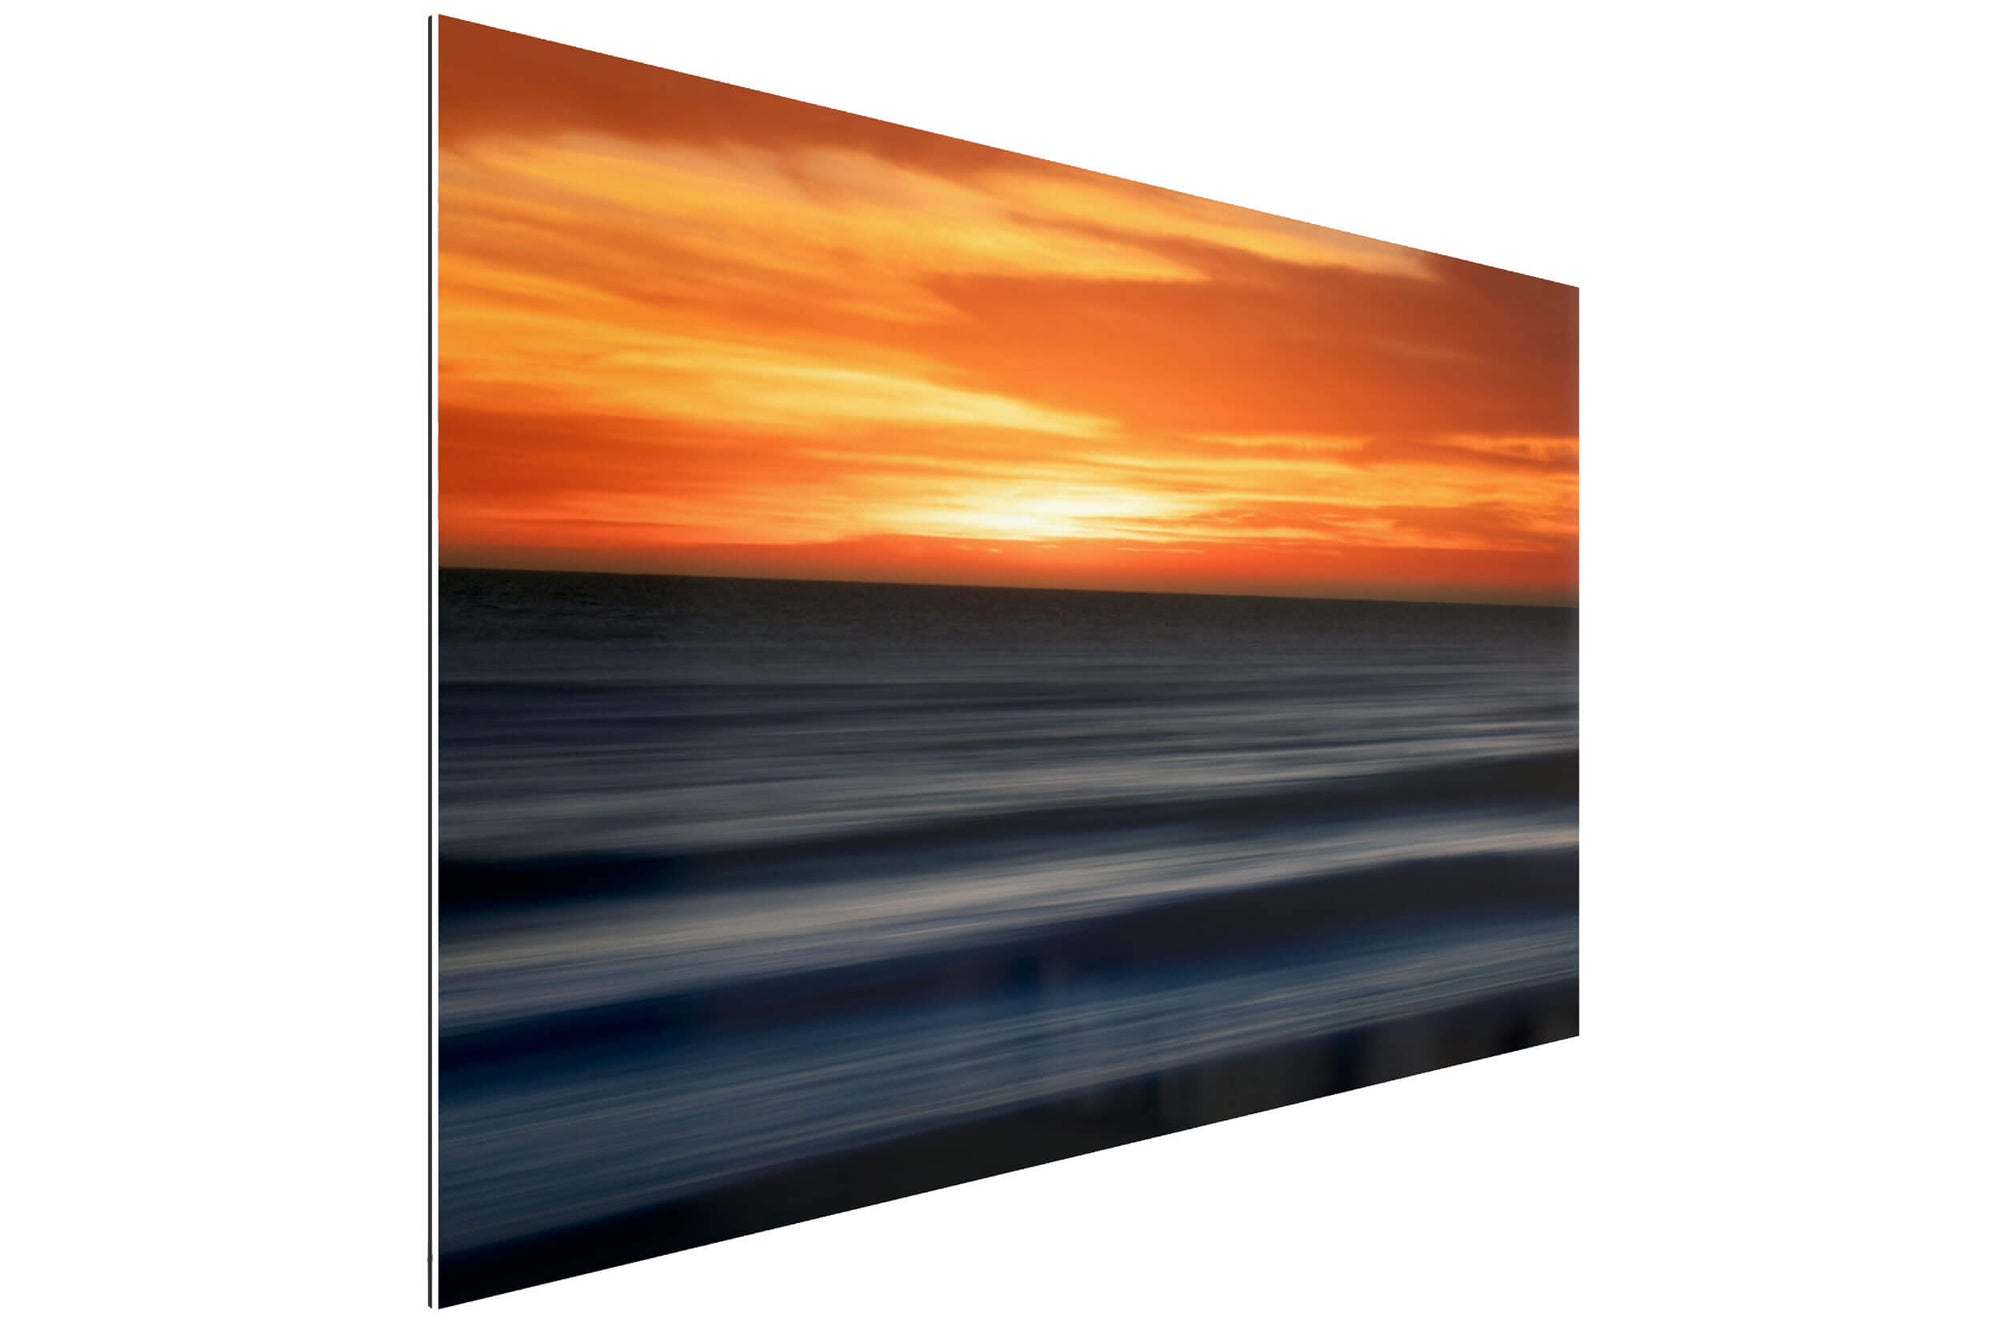 A TruLife acrylic Big Sur sunset picture captured along the California coast.